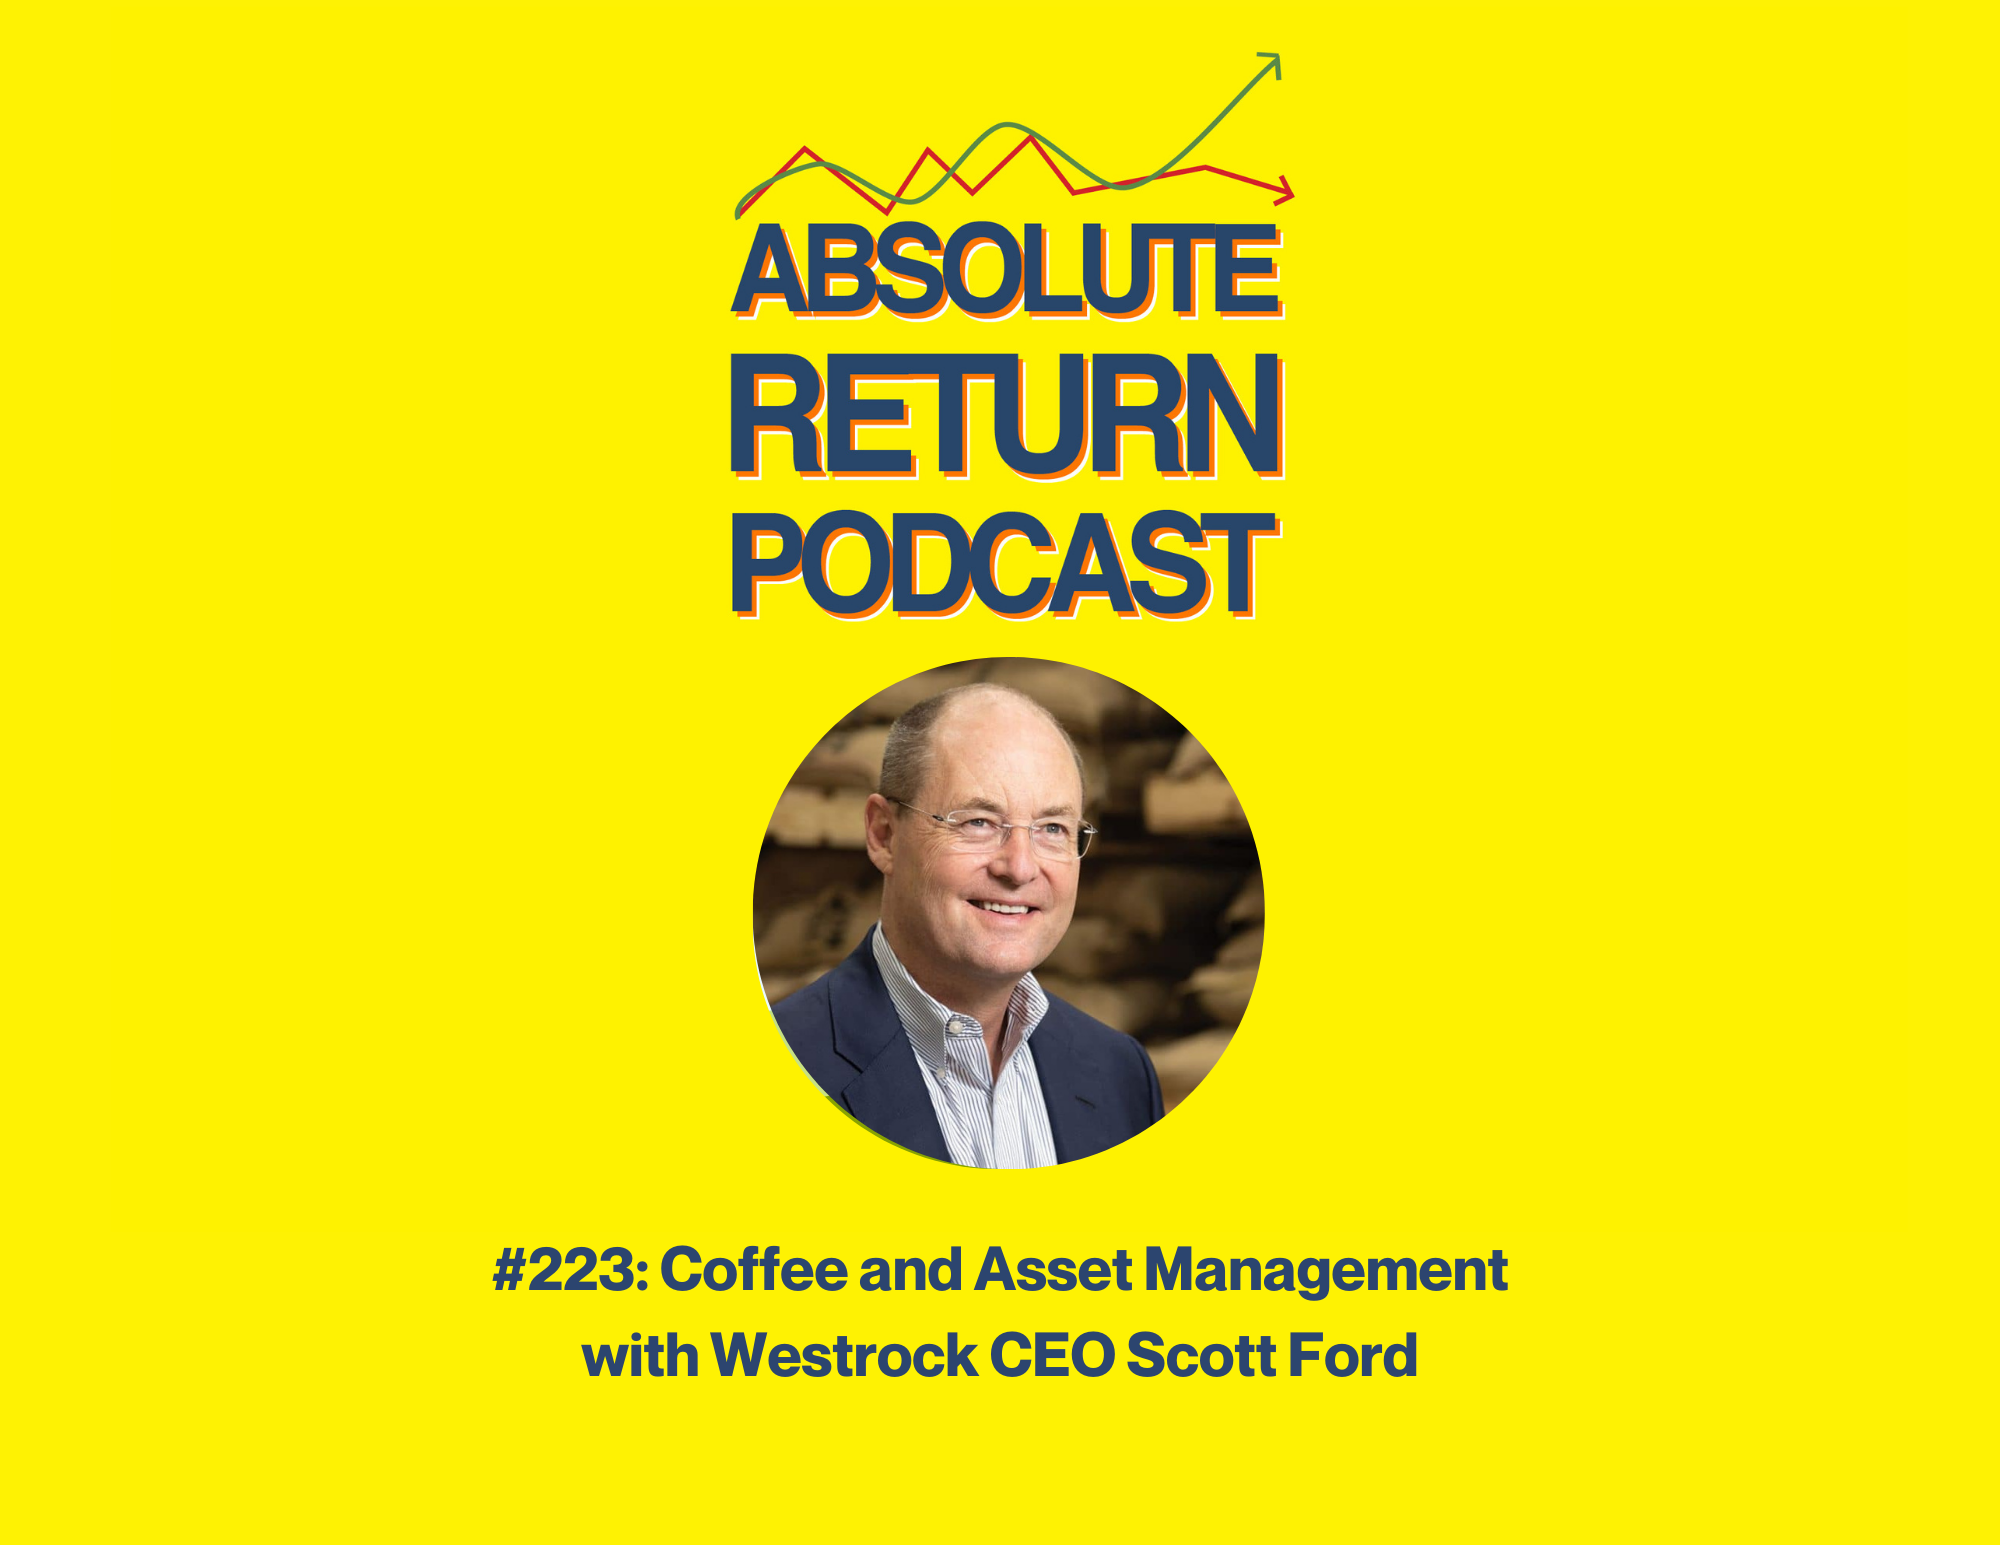 Absolute Return Podcast #223: Coffee and Asset Management with Westrock CEO Scott Ford